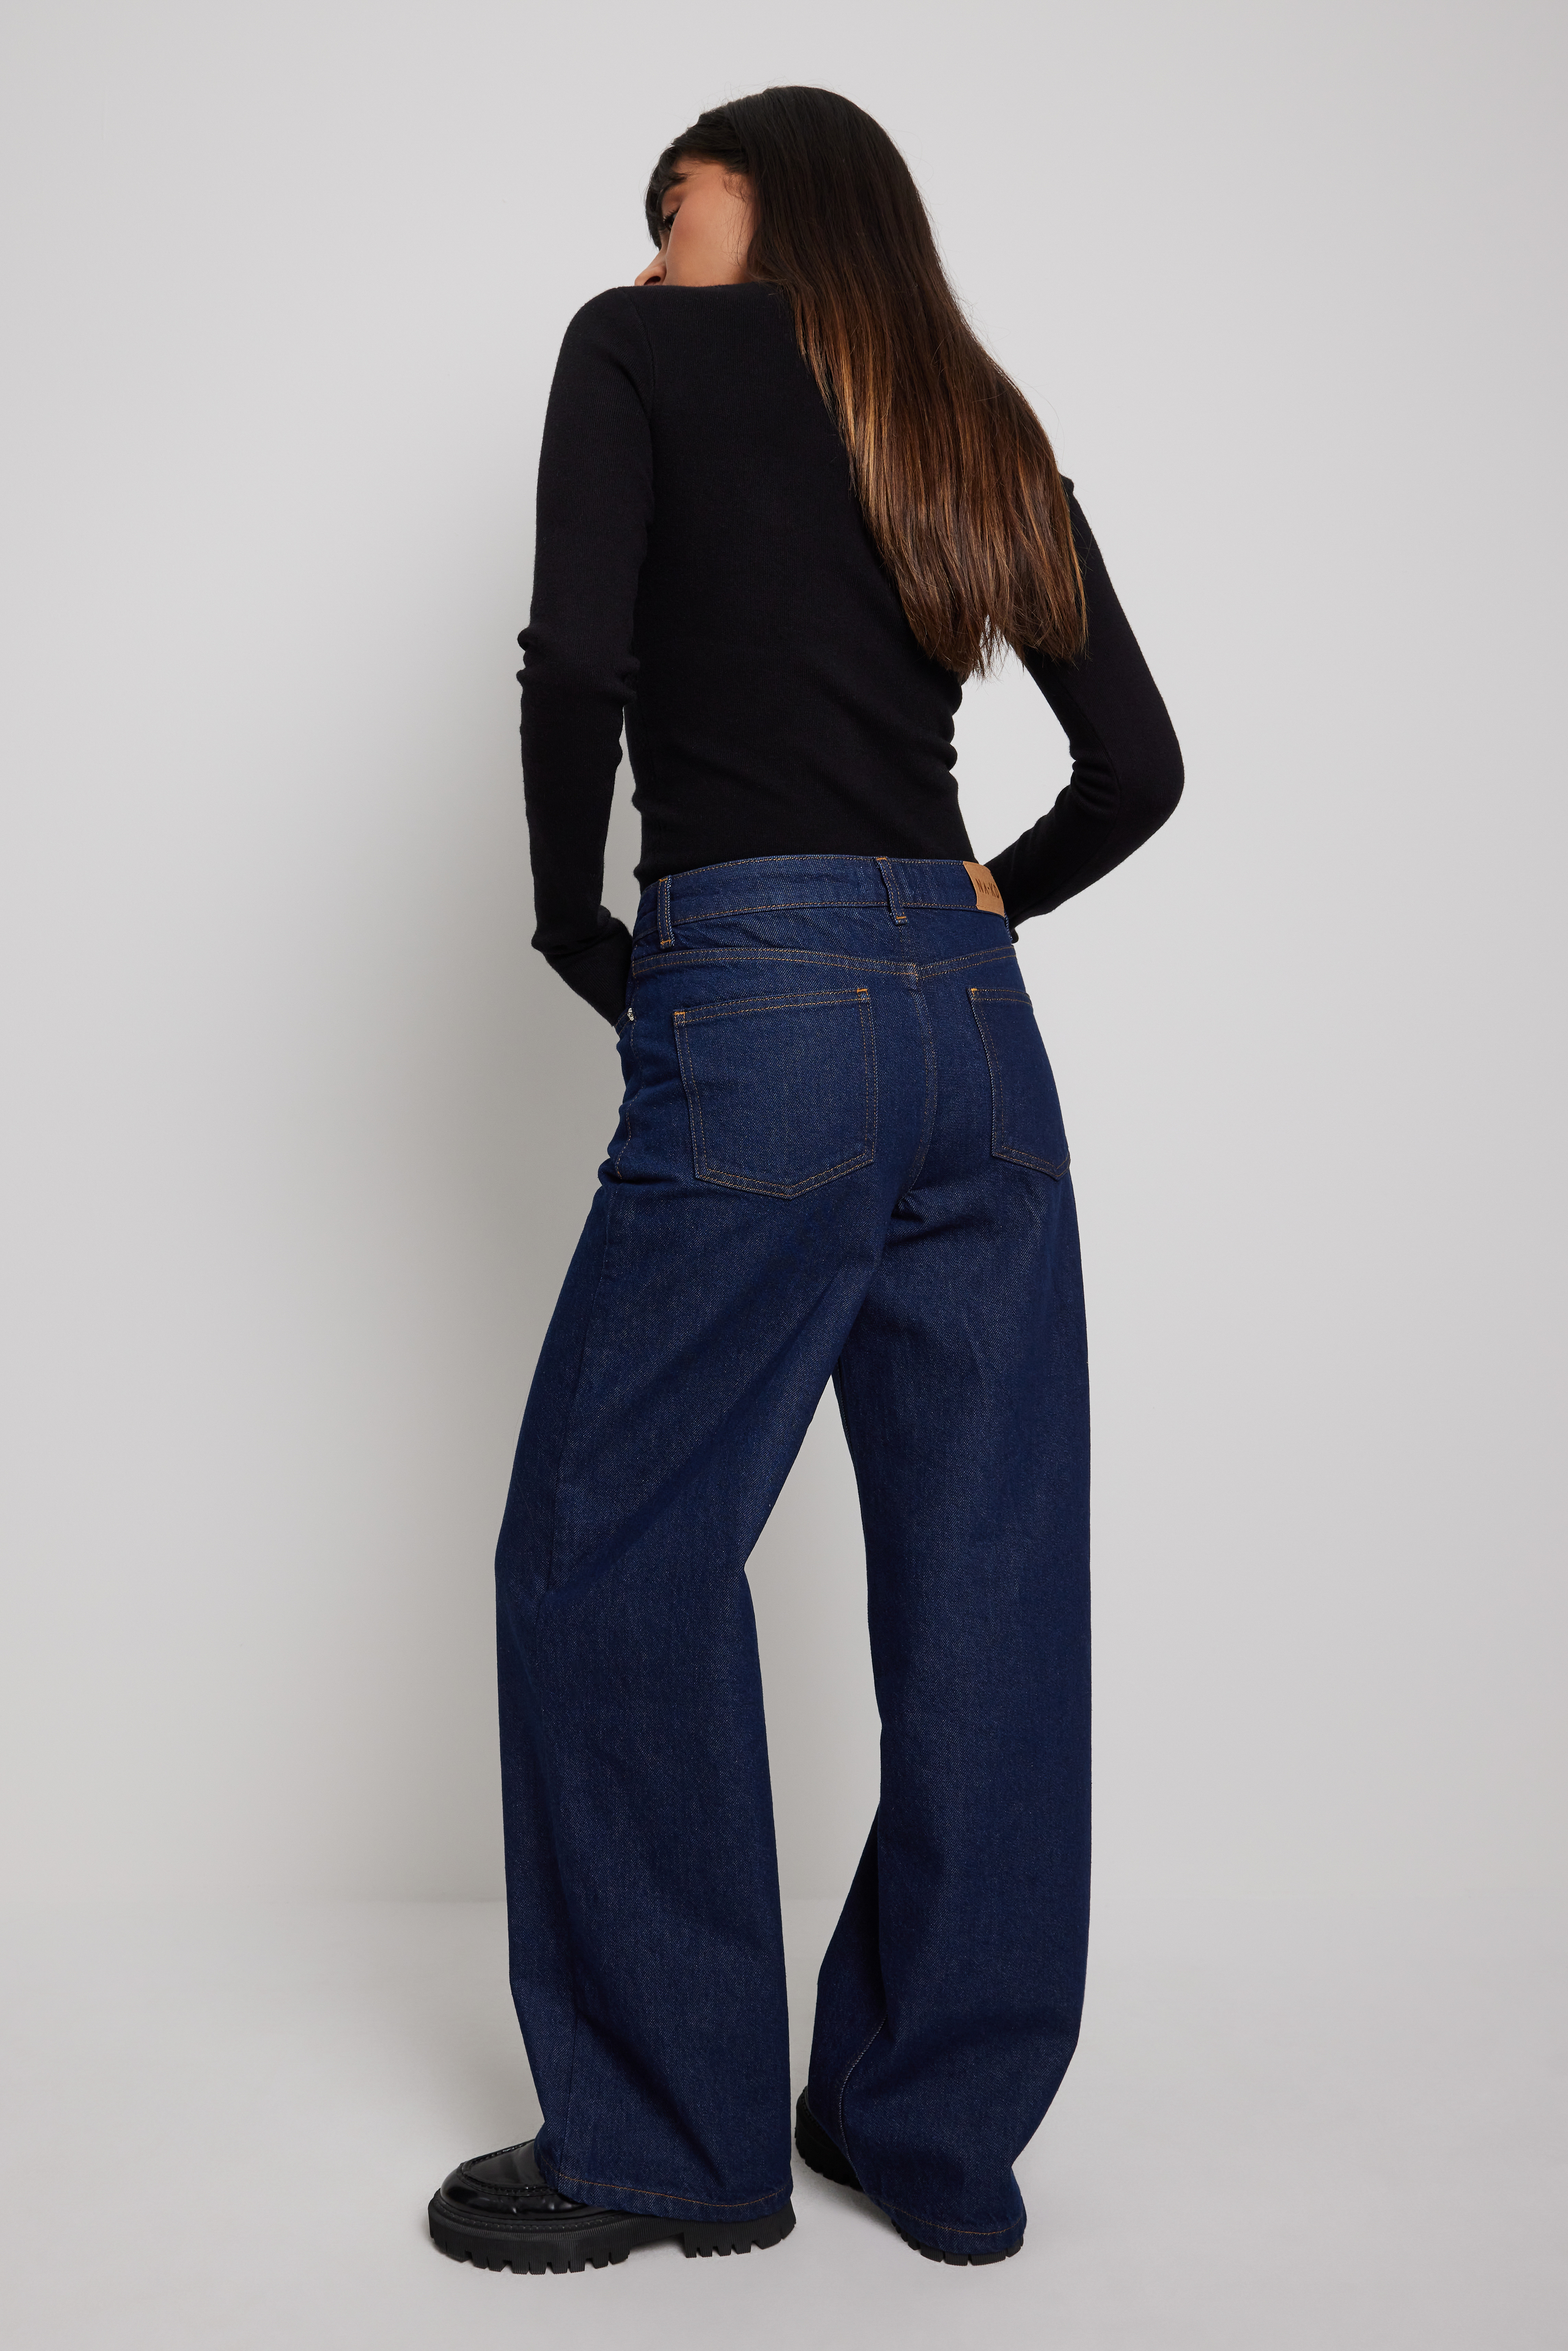 Mode Jeans Jeans taille basse Diesel Jeans taille basse bleu style d\u00e9contract\u00e9 